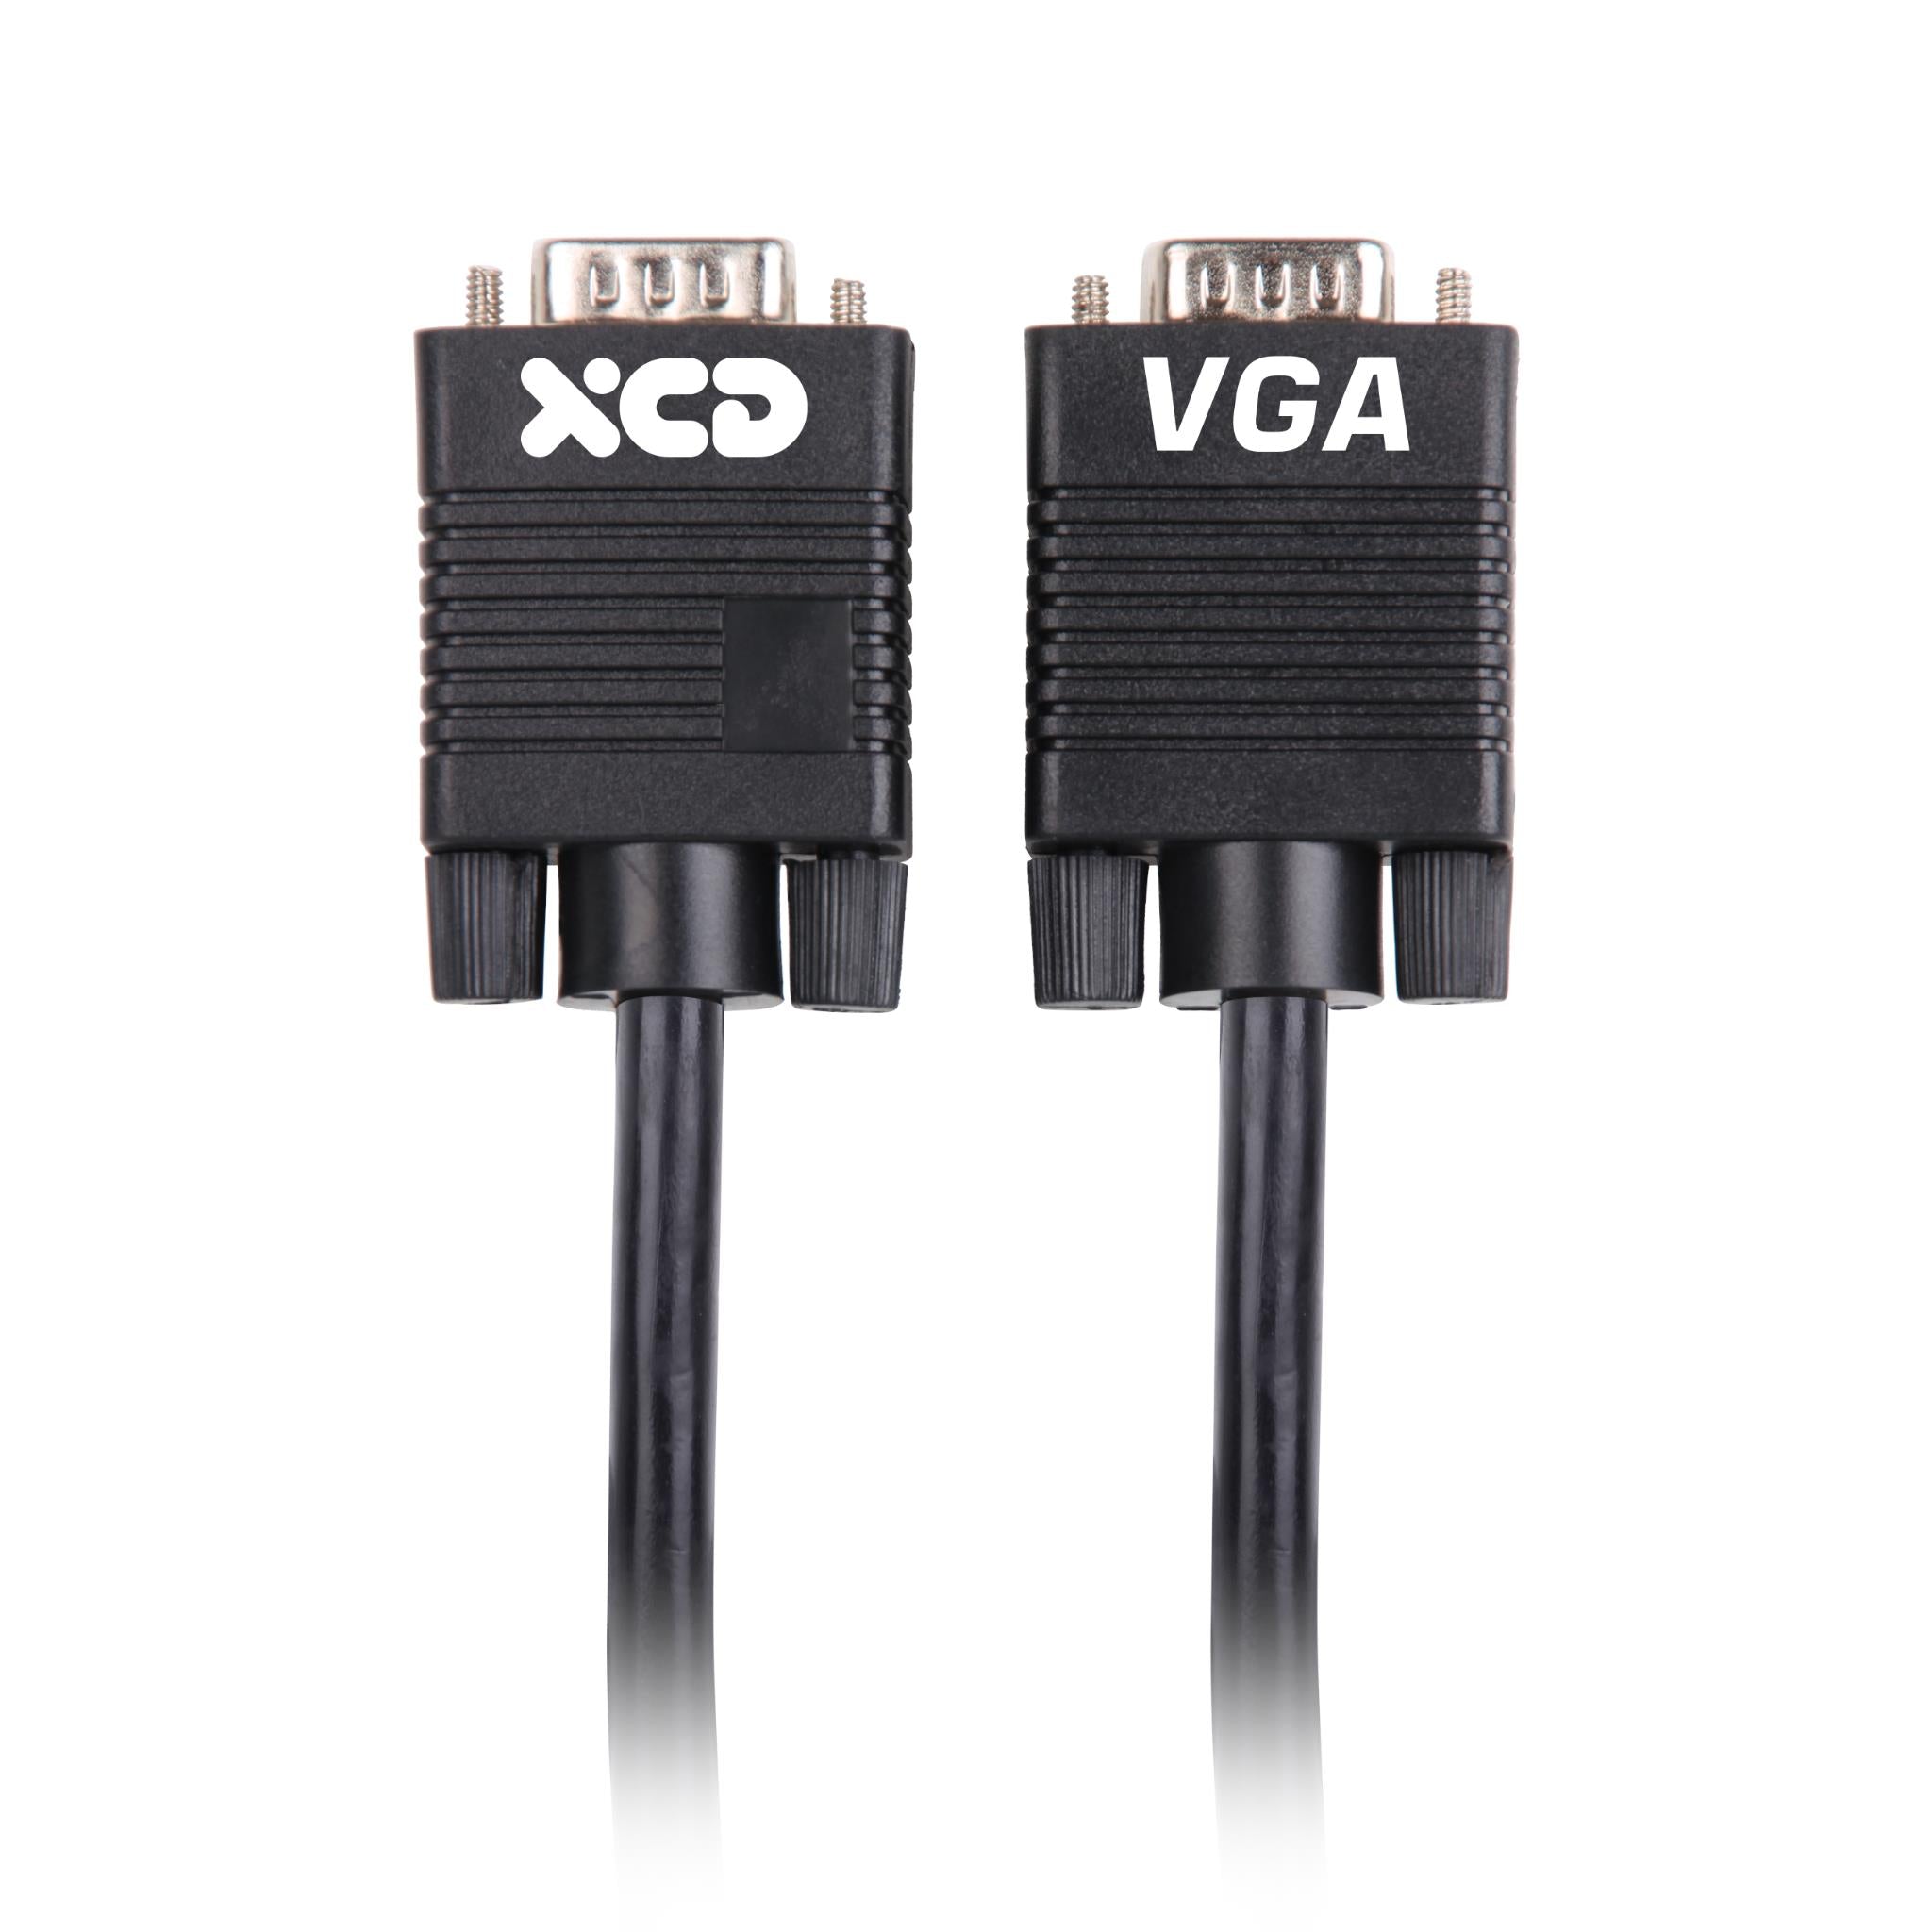 xcd vga male to vga male cable (2m)